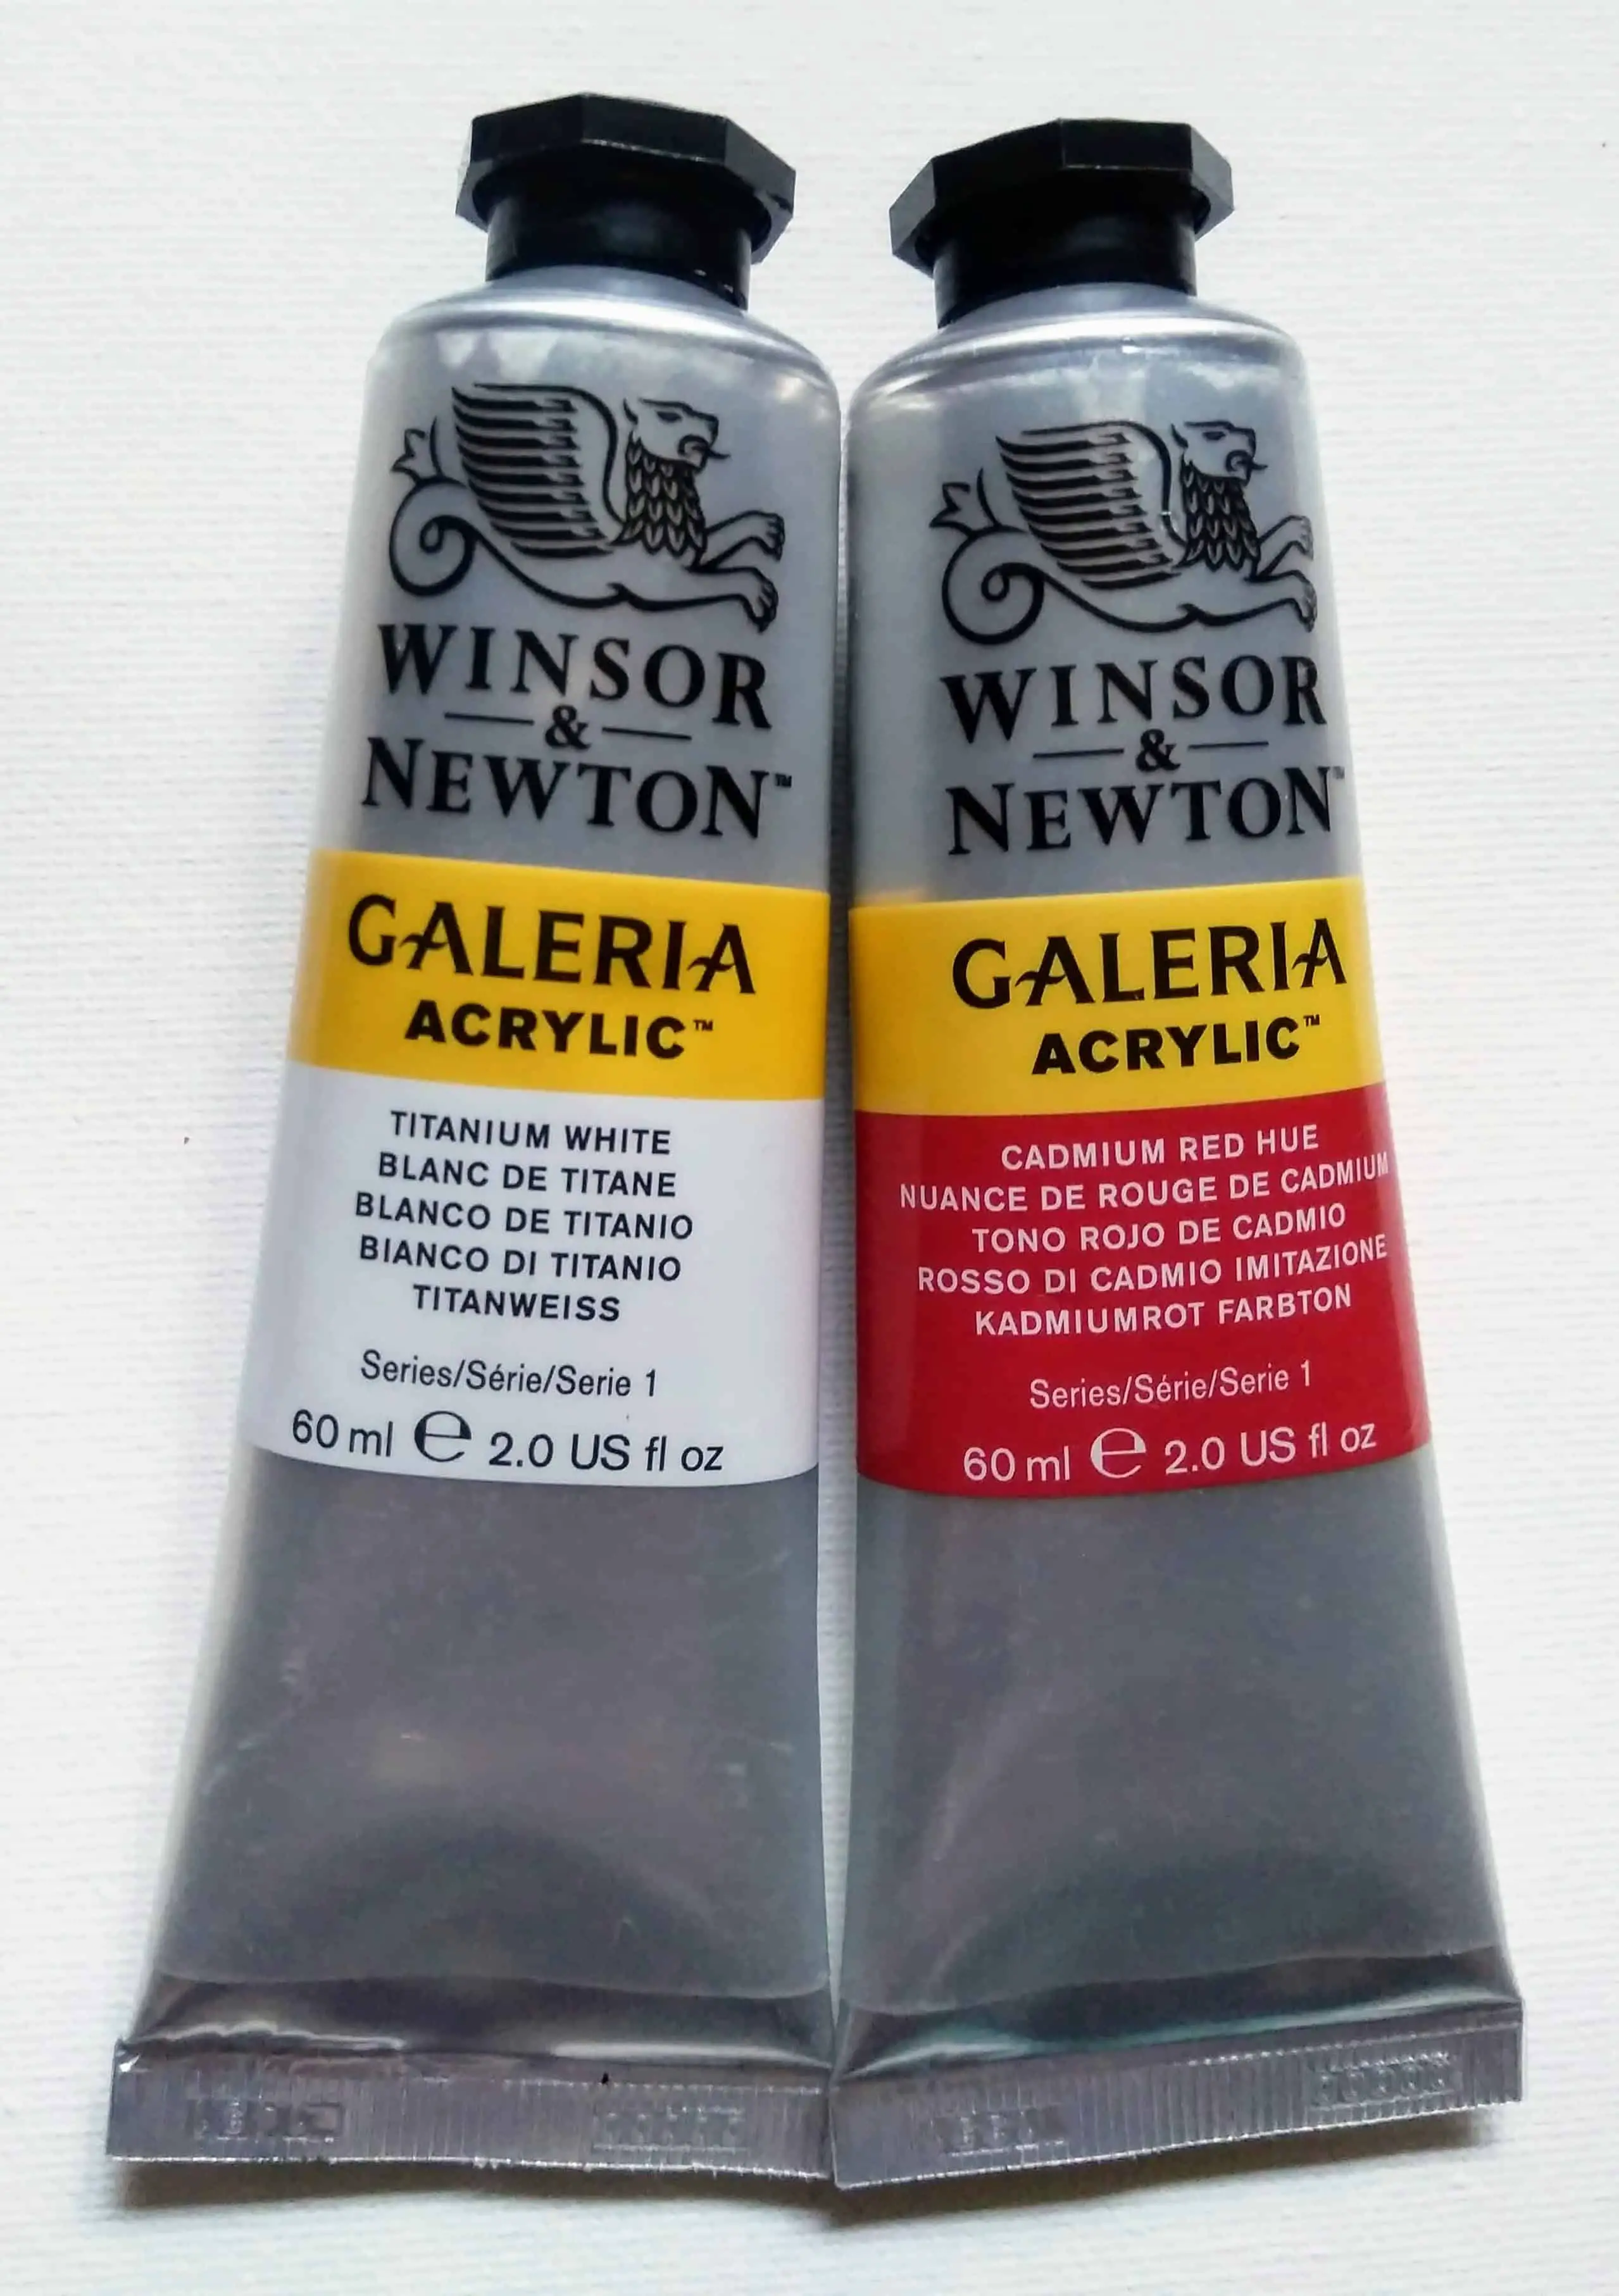 Winsor and Newton Galeria Acrylic: is it worth the buck?